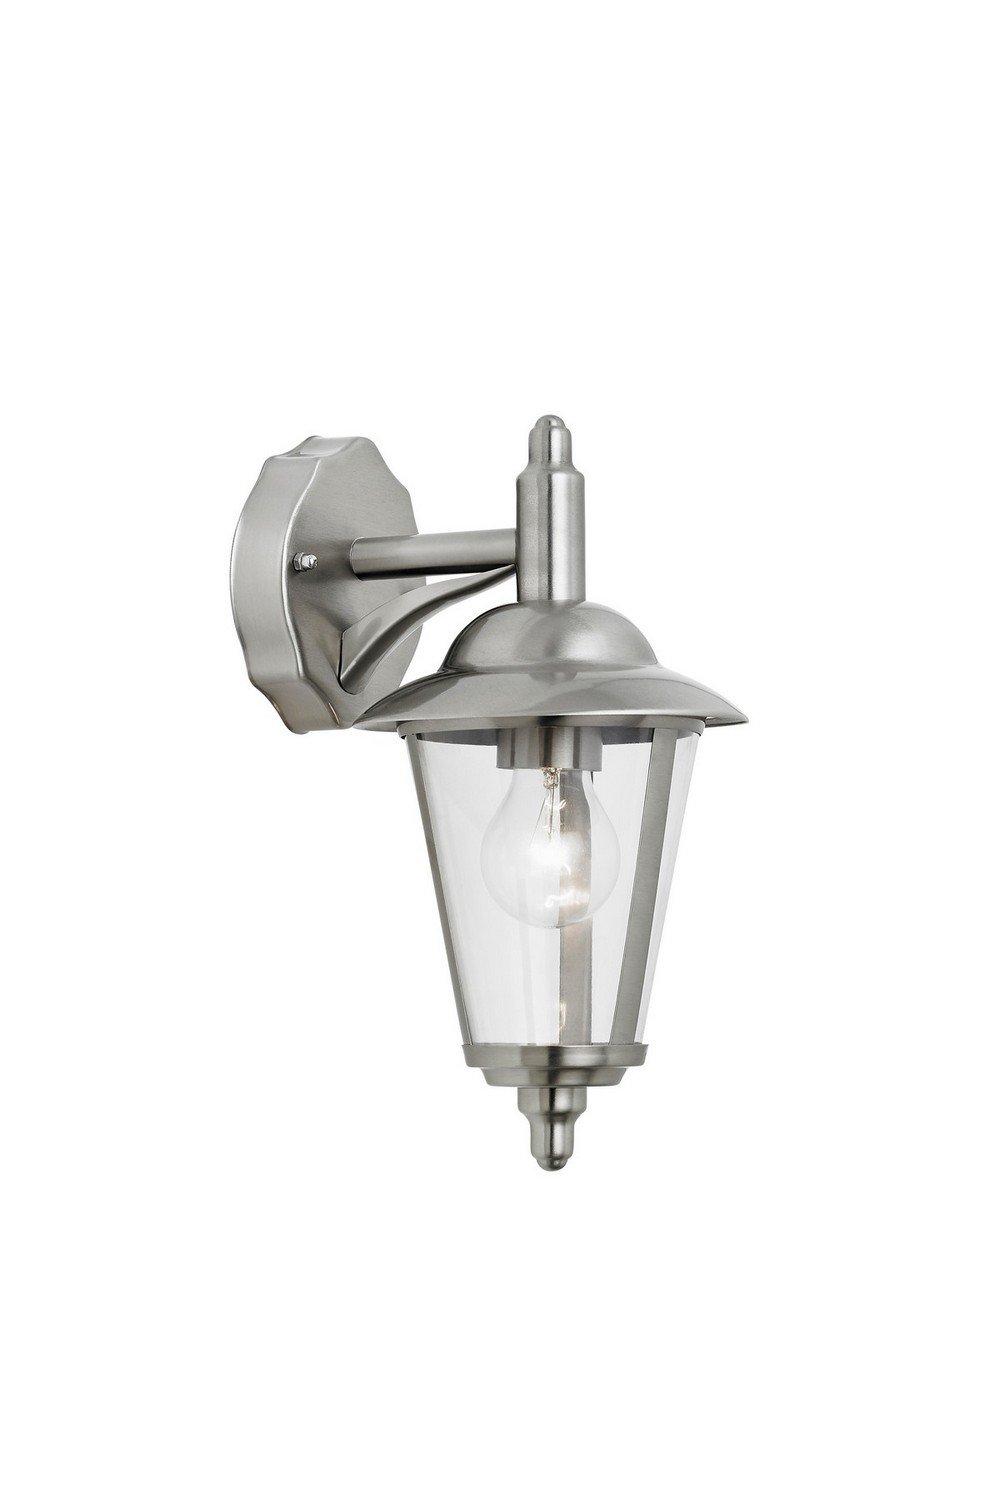 Klien 1 Light Outdoor Wall Lantern Polished Stainless Steel Clear Polycarbonate IP44 E27